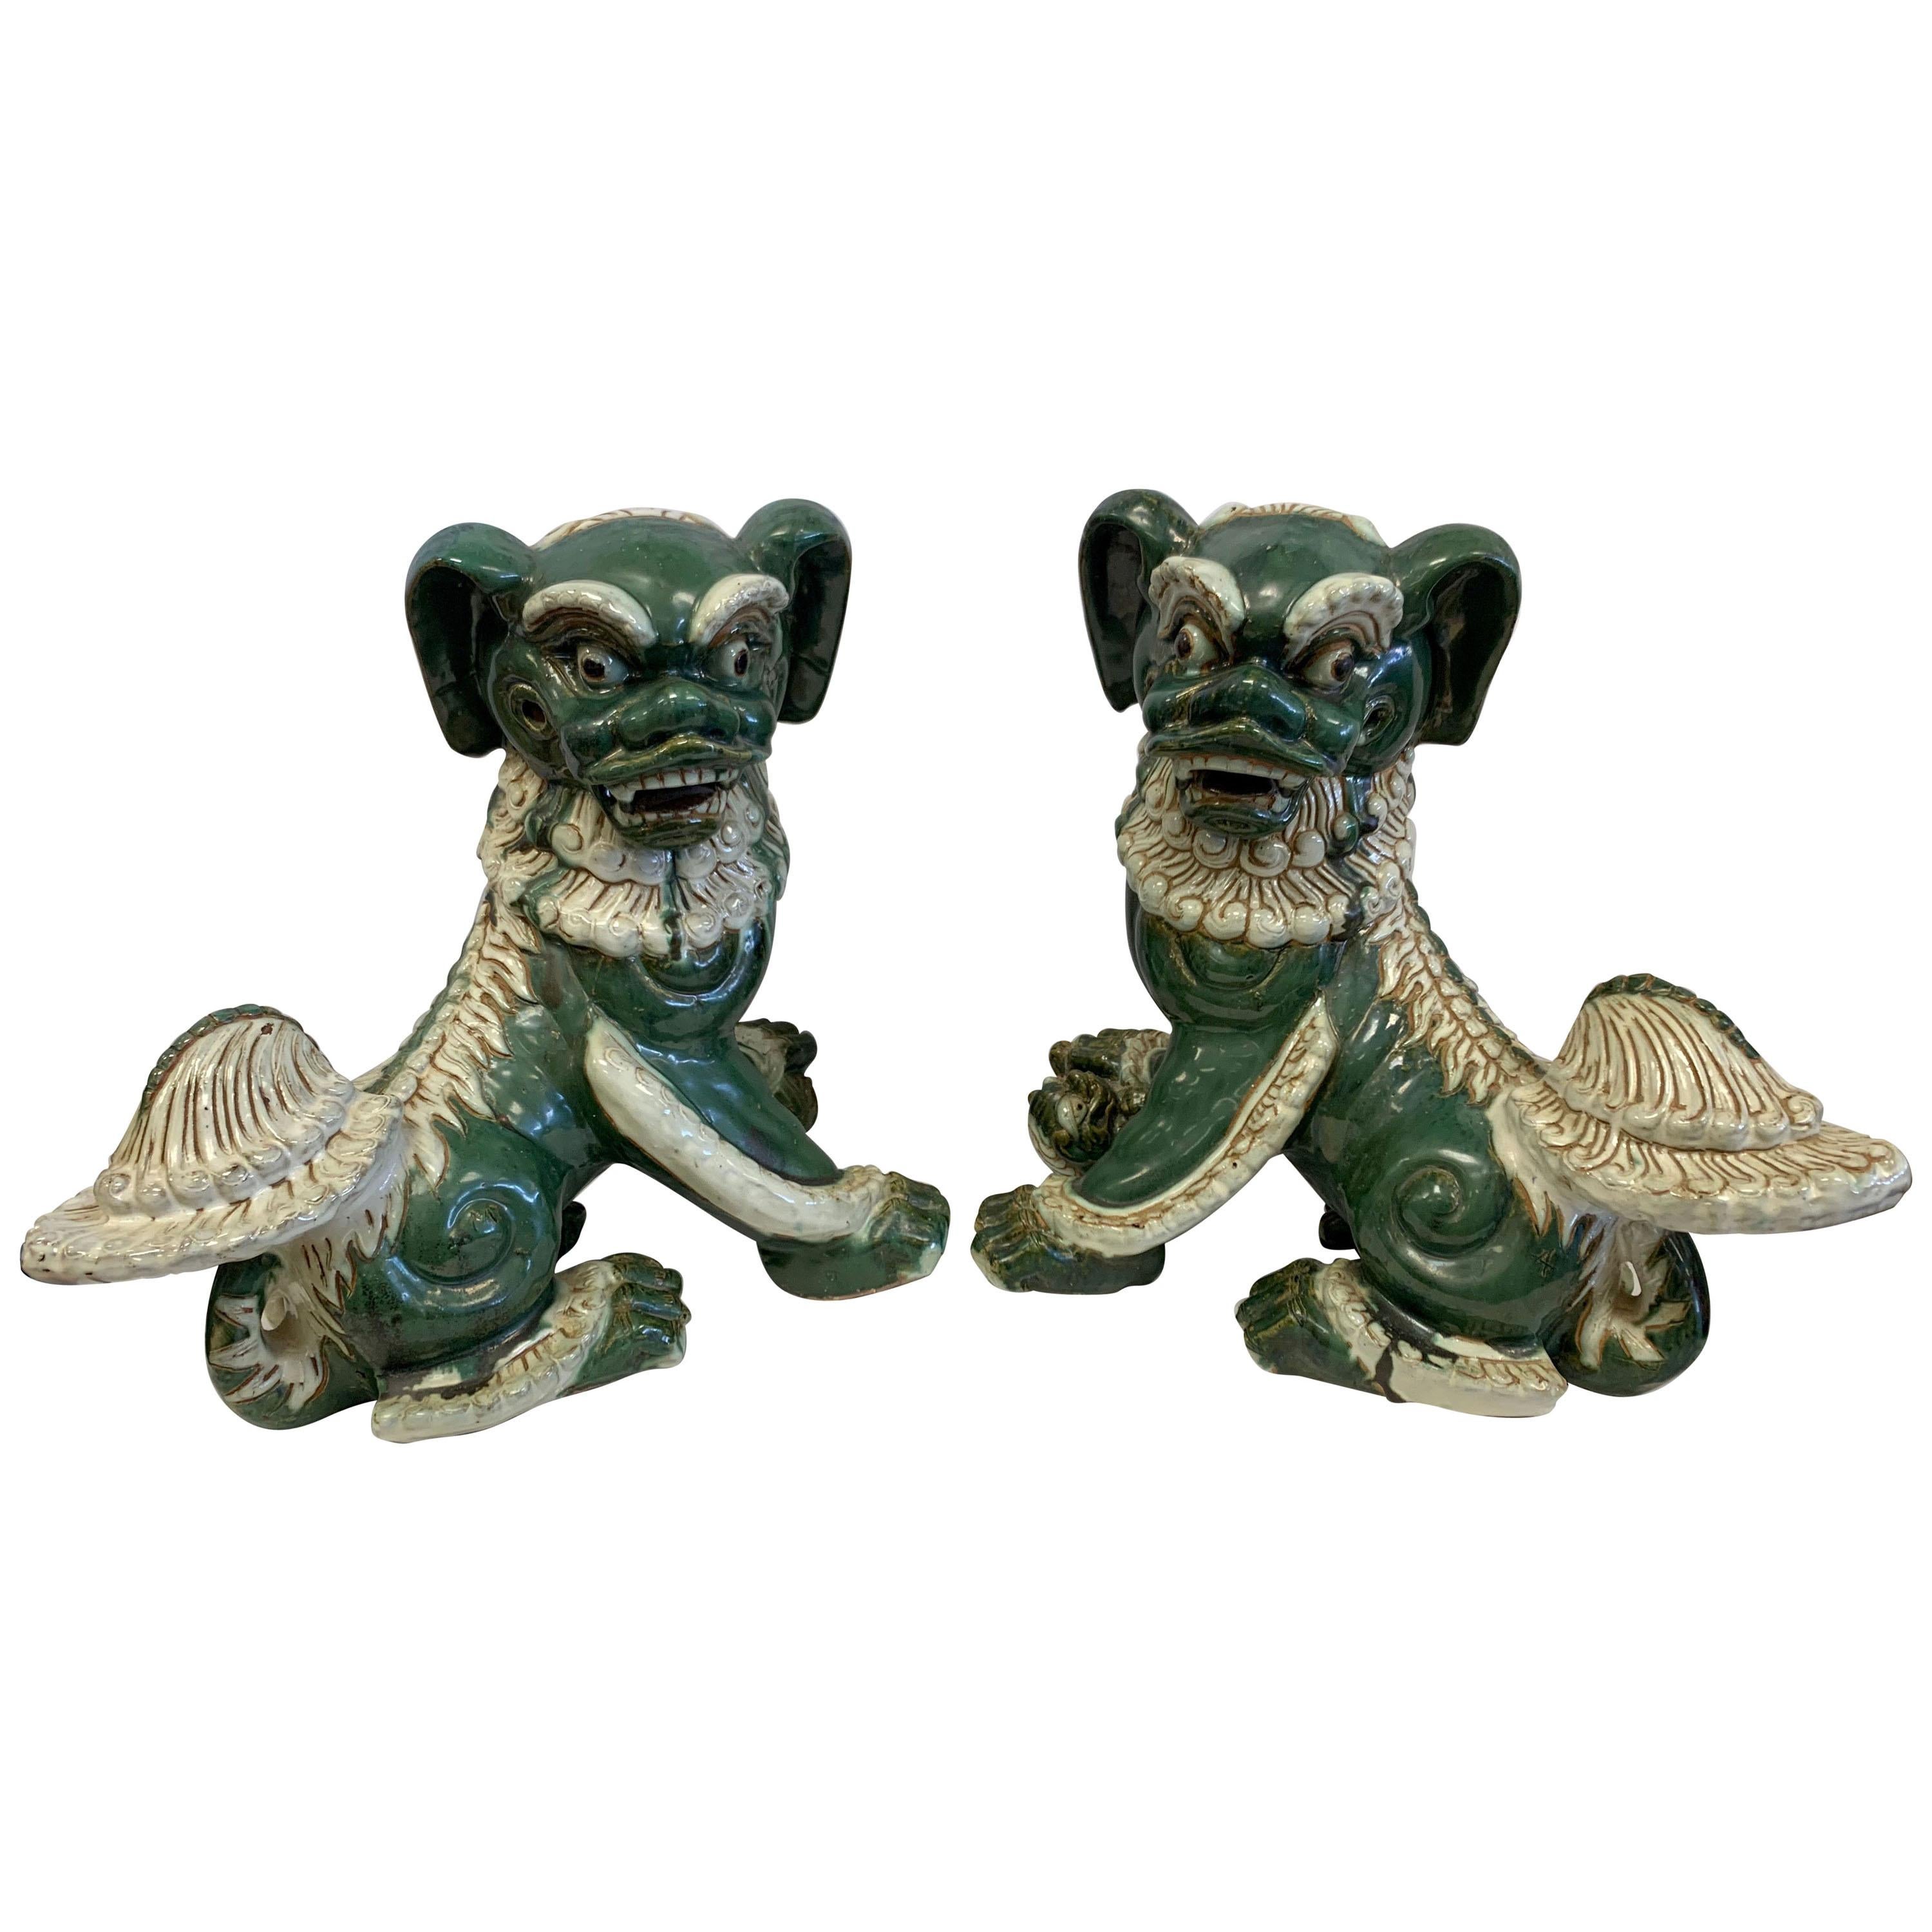 Extra-Large Pair of Chinese Glazed Porcelain Foo Dogs Sculptures